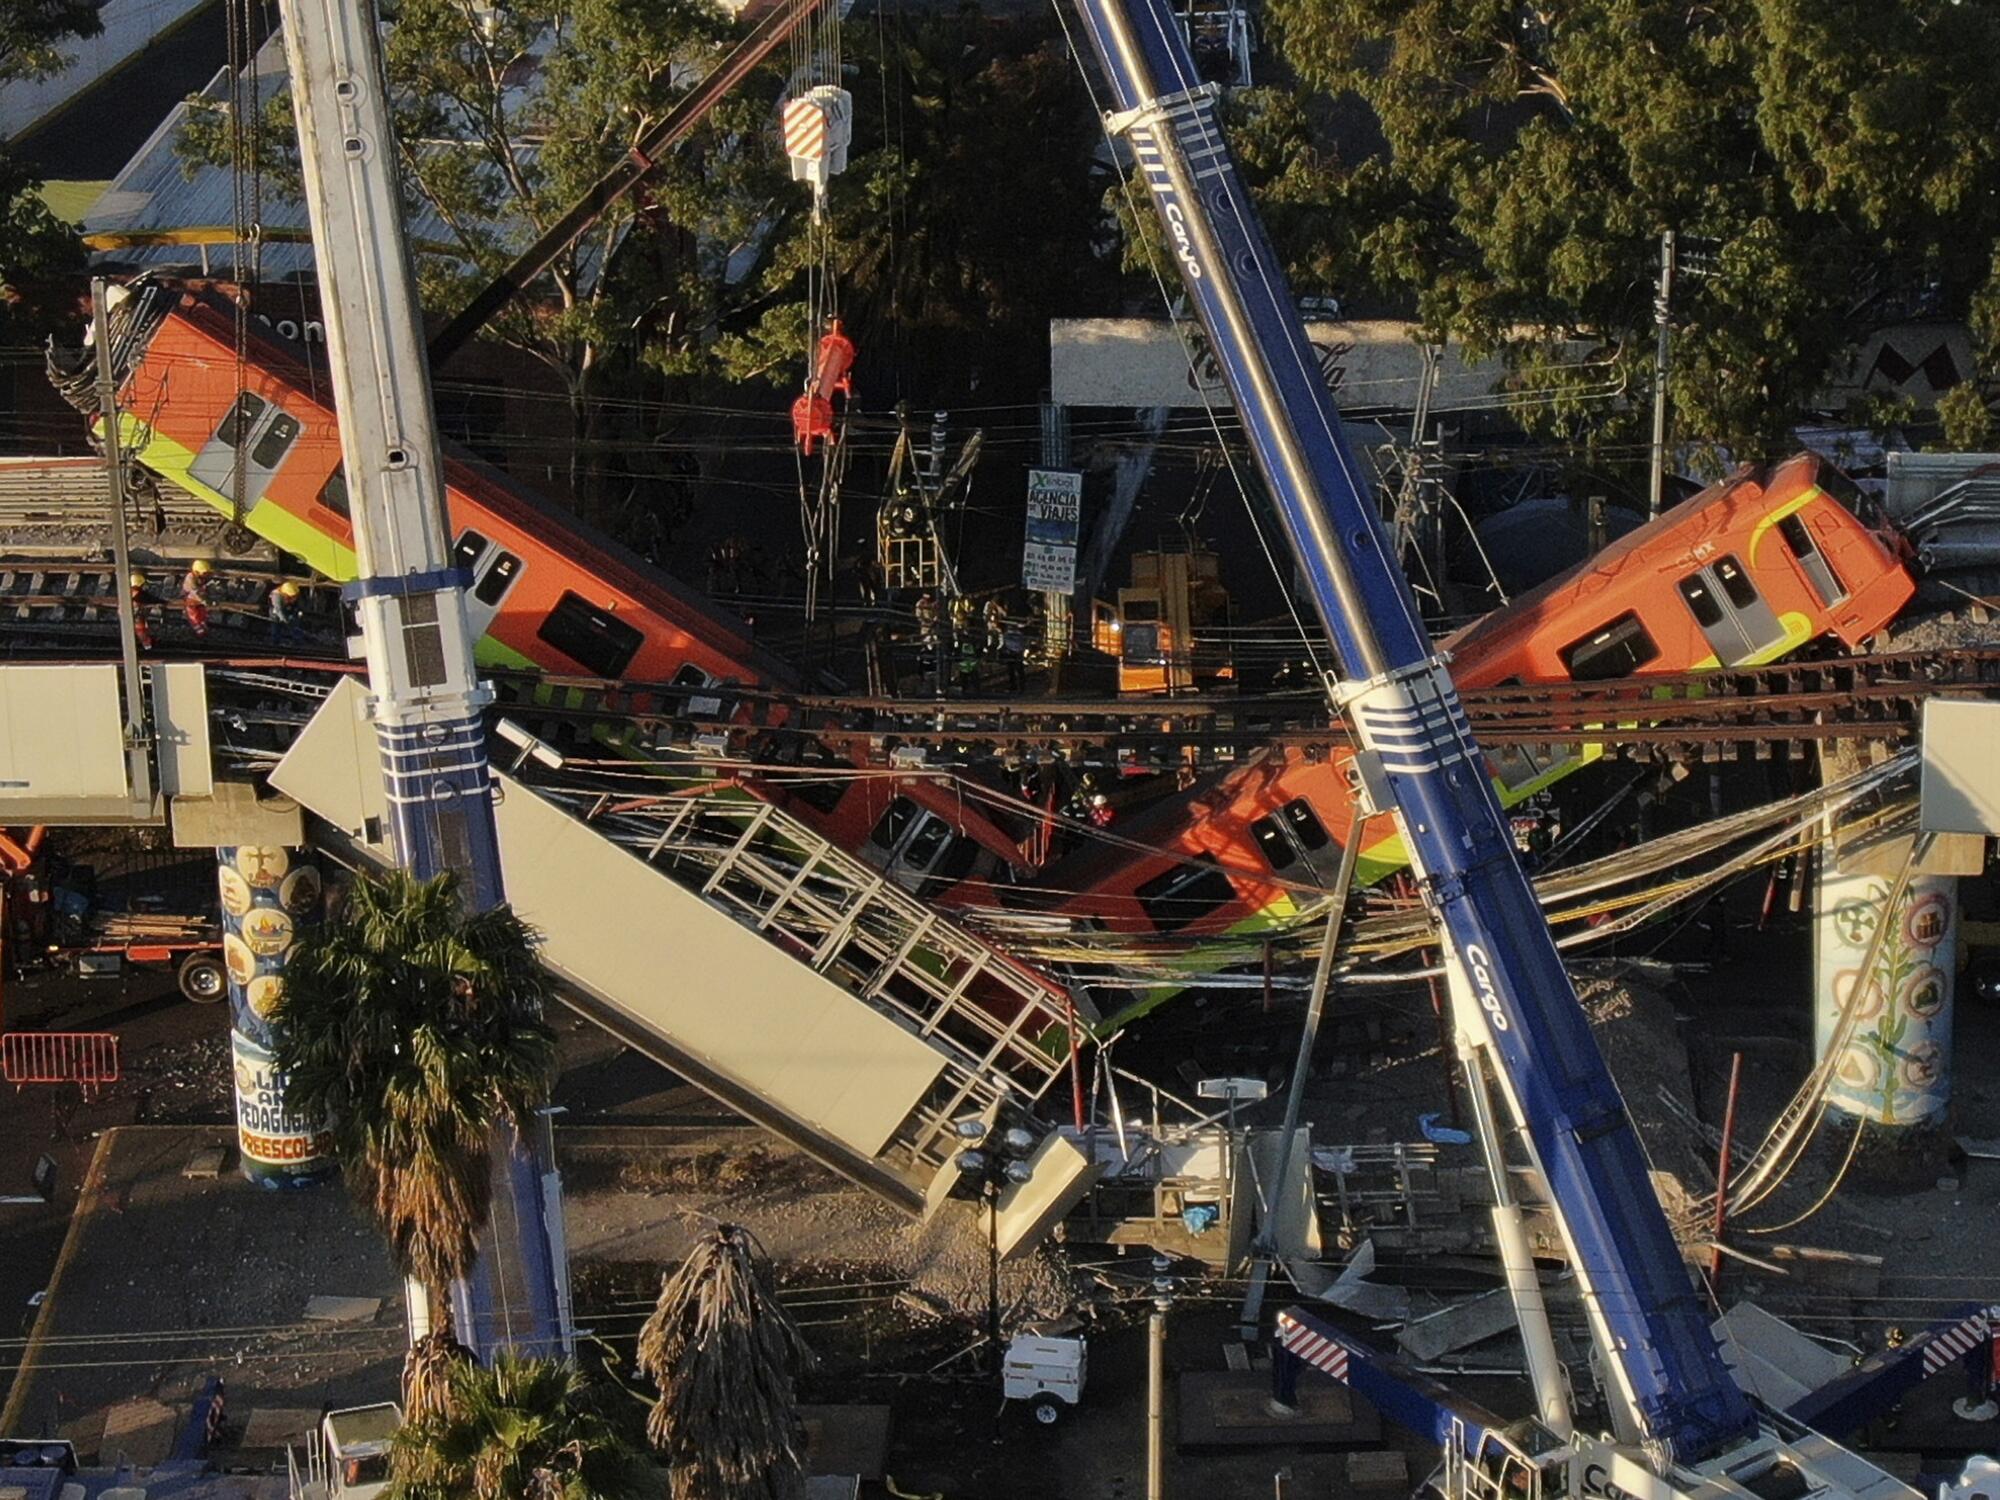 An aerial view of subway cars dangling at an angle from a collapsed elevated section of the Metro line.